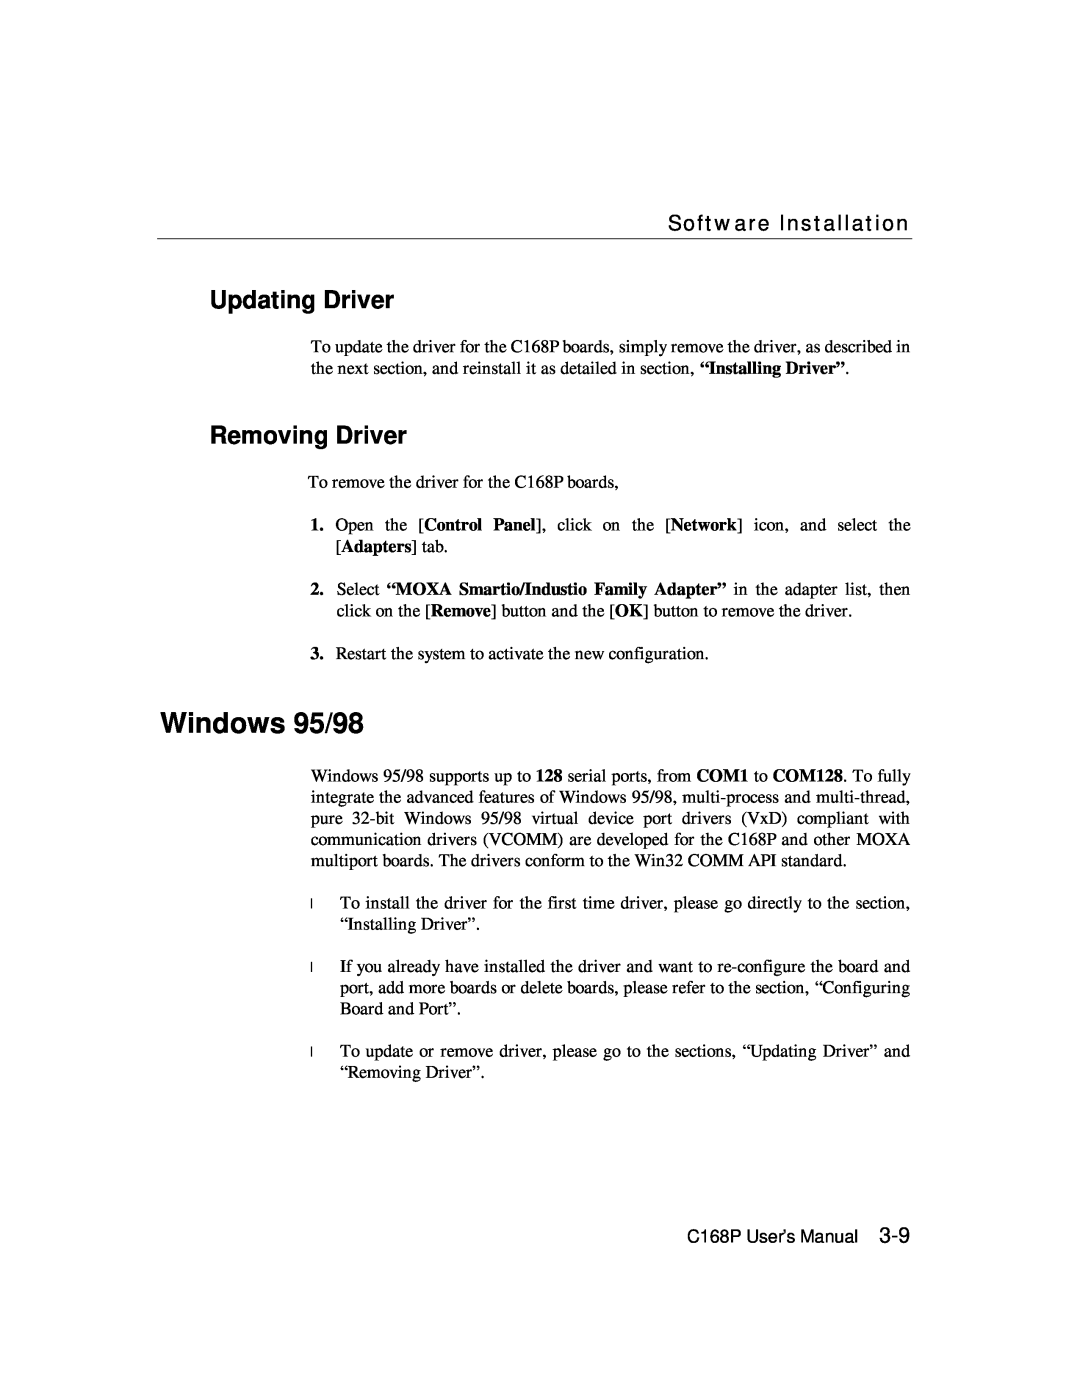 Moxa Technologies C168P user manual Windows 95/98, Updating Driver, Removing Driver, Software Installation 